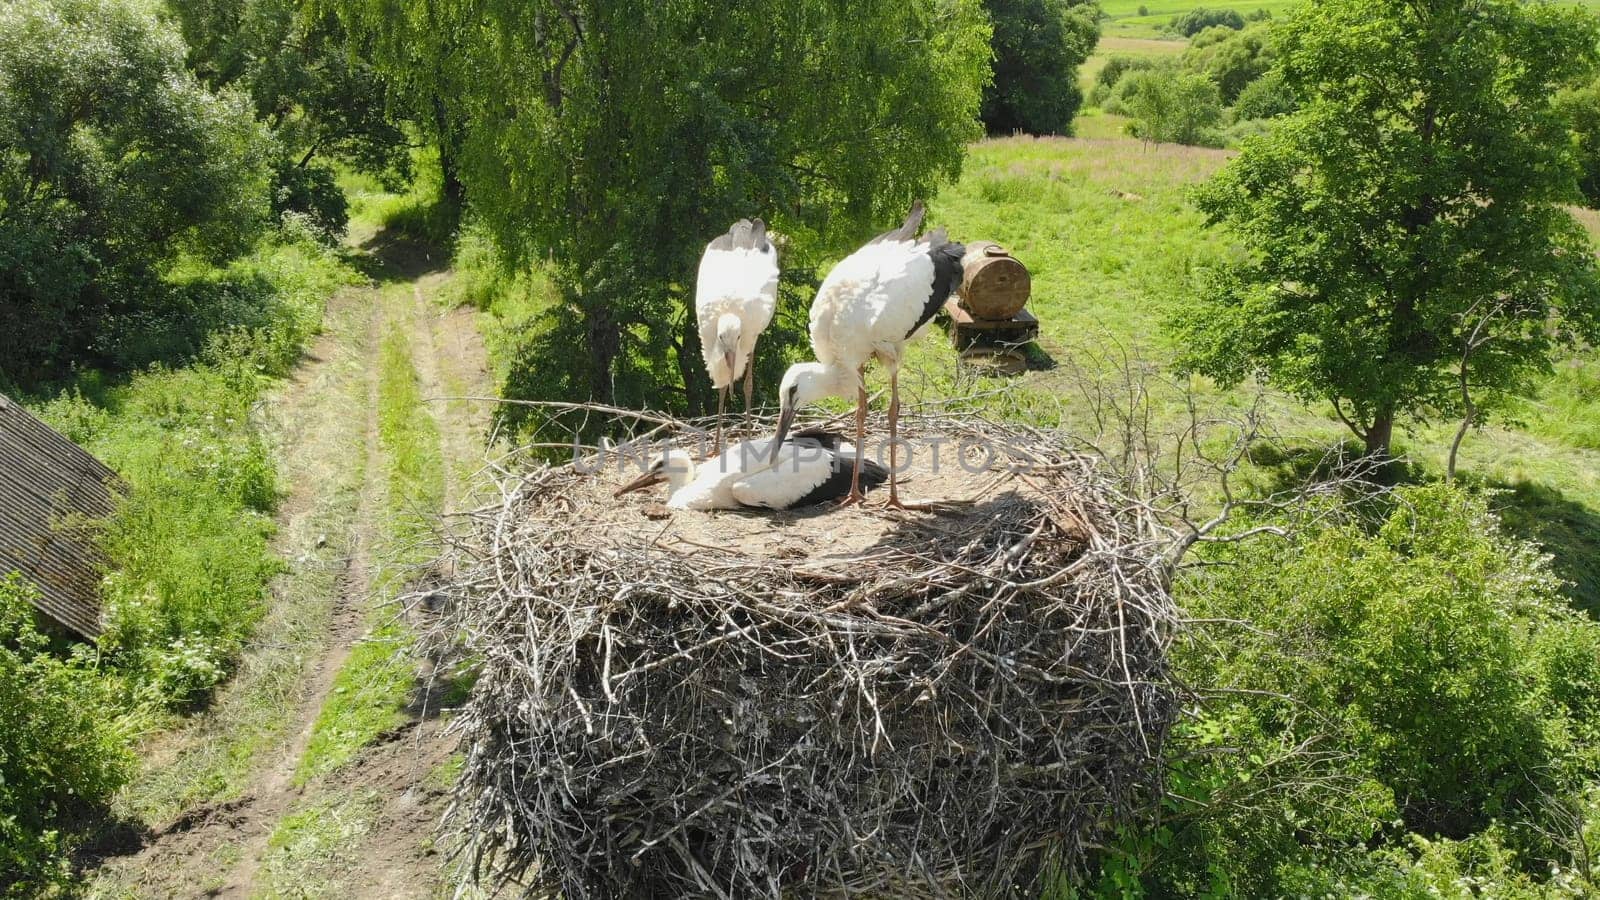 The stork's mother flies to the nest and feeds them. Drone view